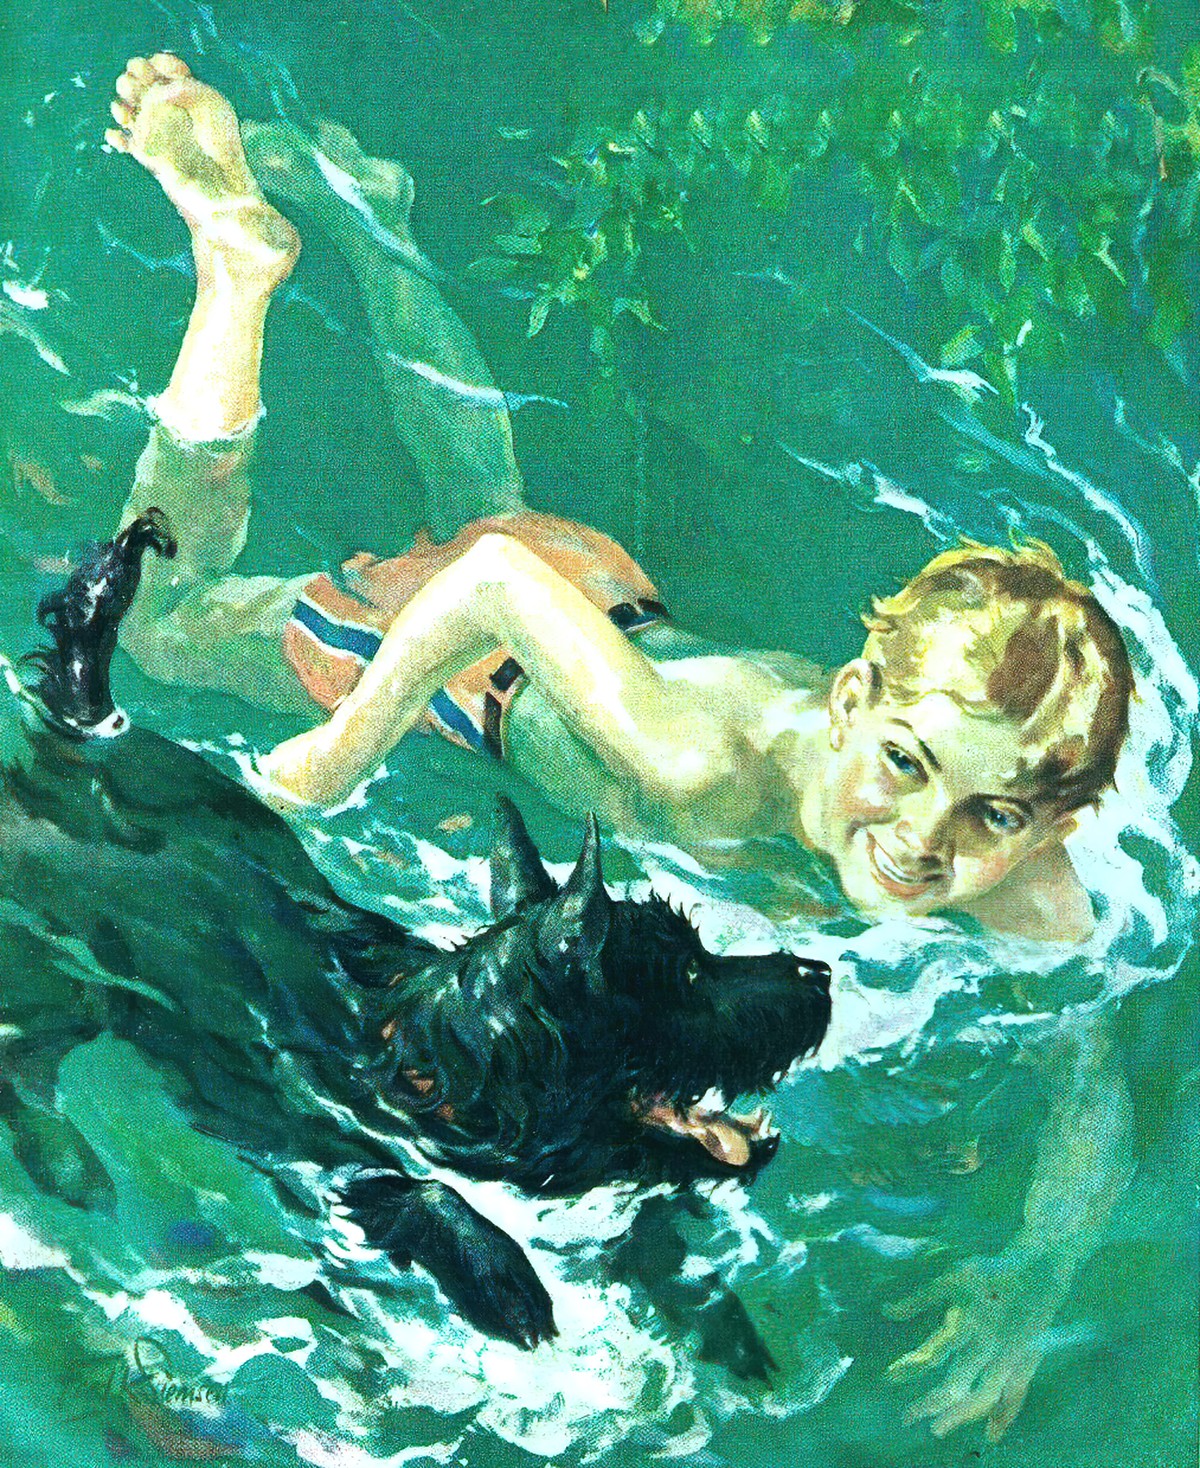 The Country Home Magazine August 1932 Olympics edition. A boy swimming with his Scottish Terrier